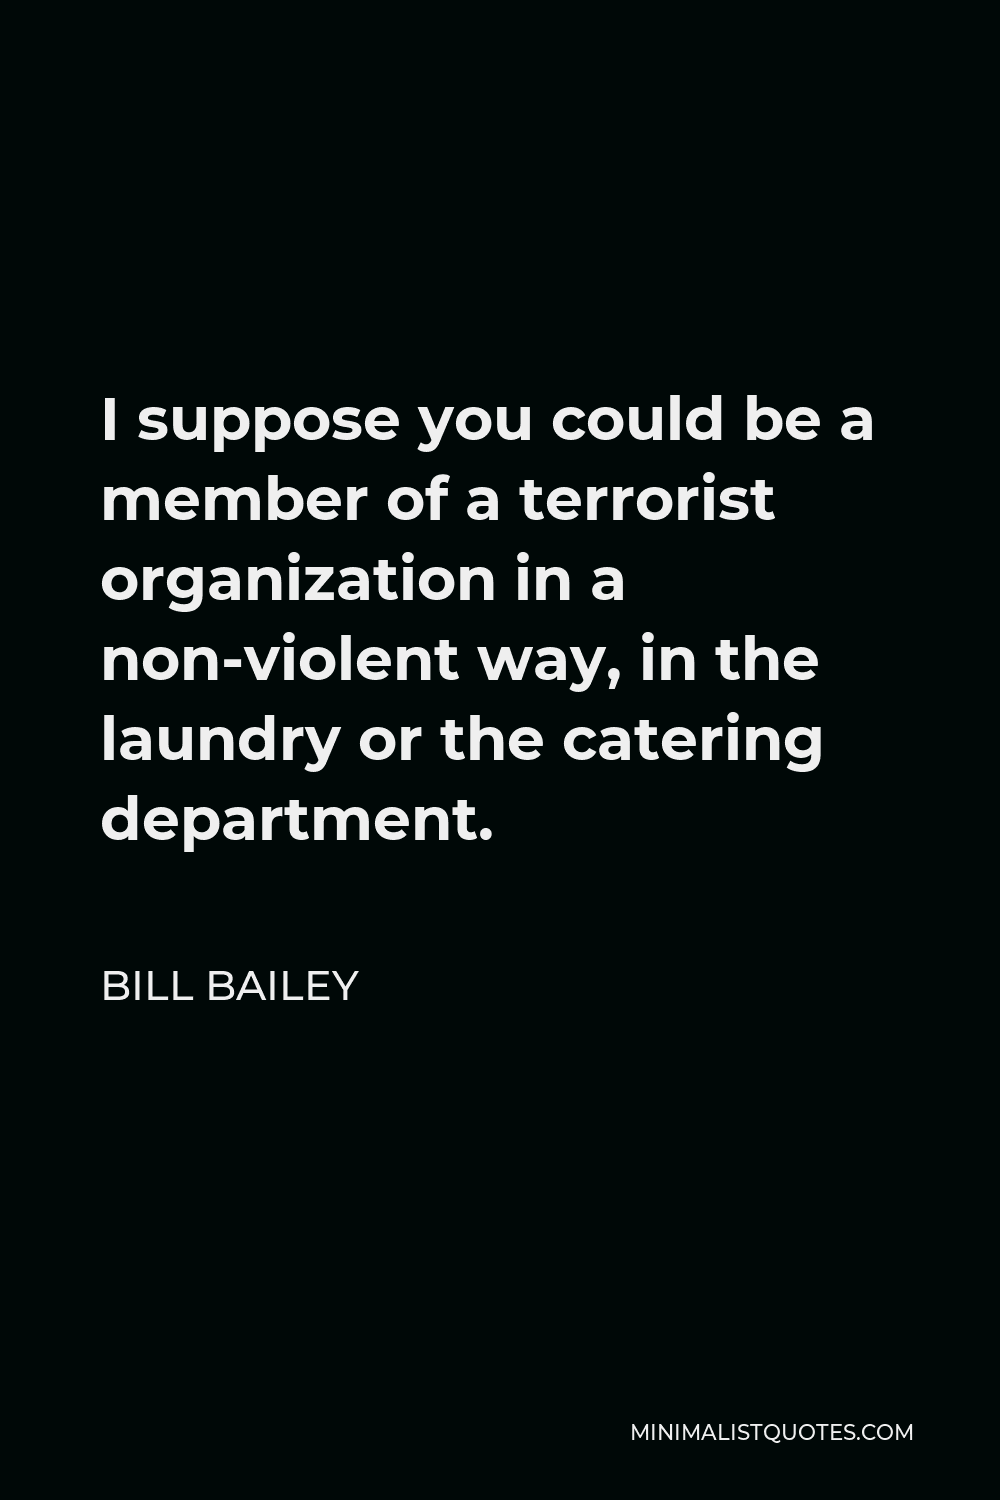 Bill Bailey Quote - I suppose you could be a member of a terrorist organization in a non-violent way, in the laundry or the catering department.